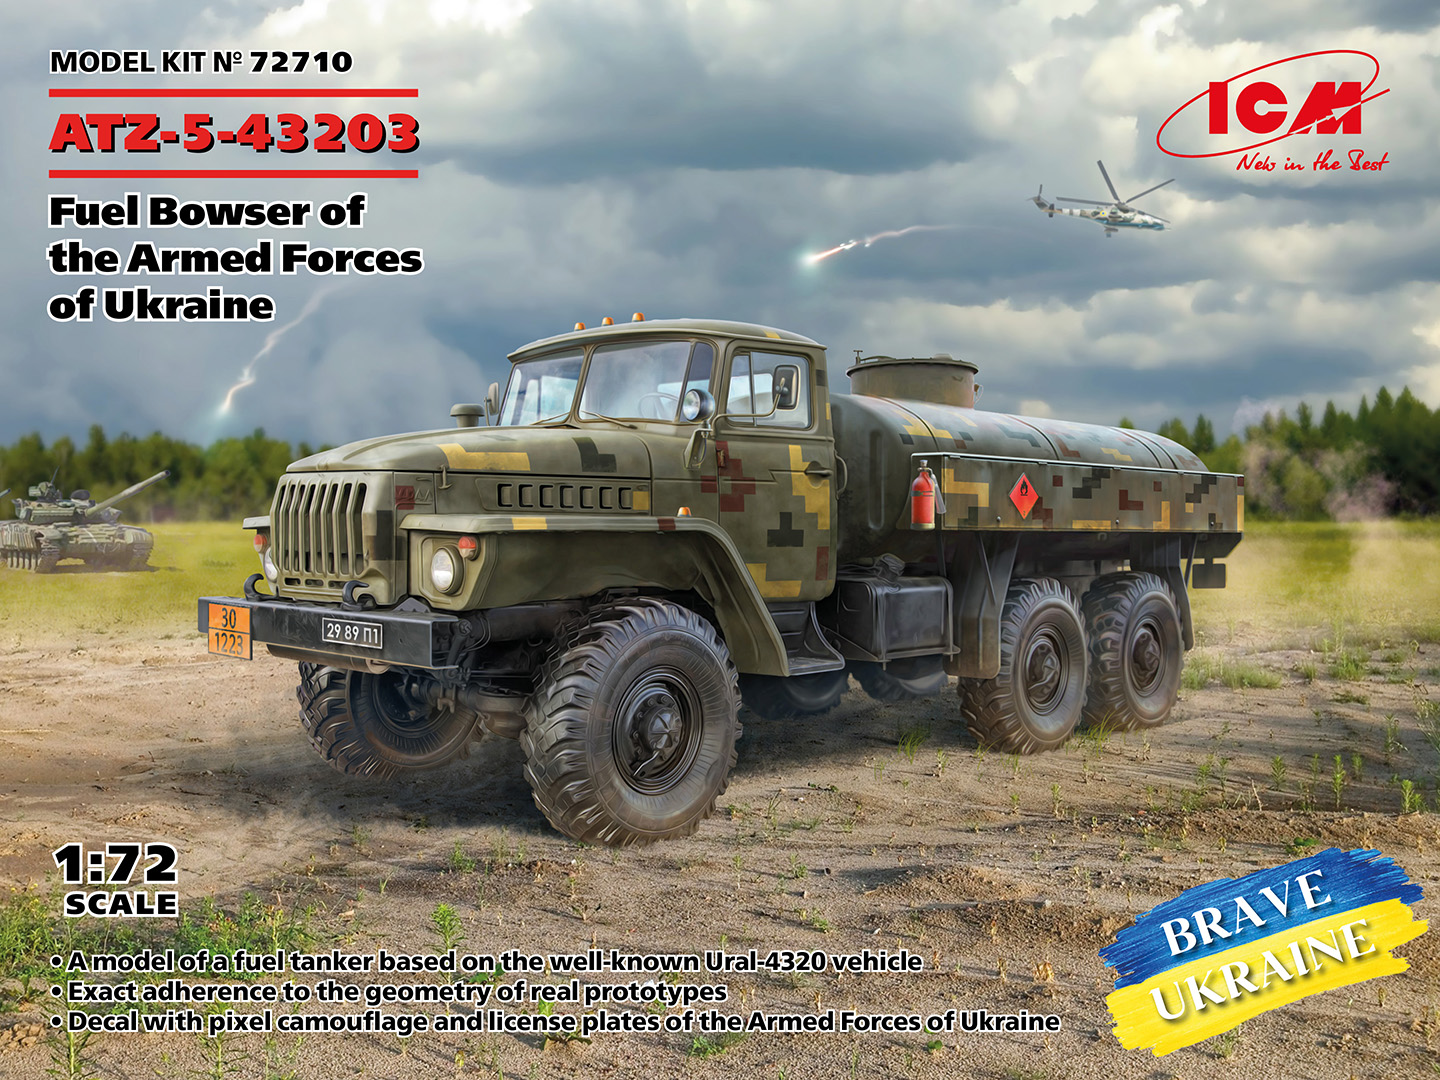 1:72 ICM ATZ-5-43203, Fuel Bowser of the Armed Forces of Ukraine